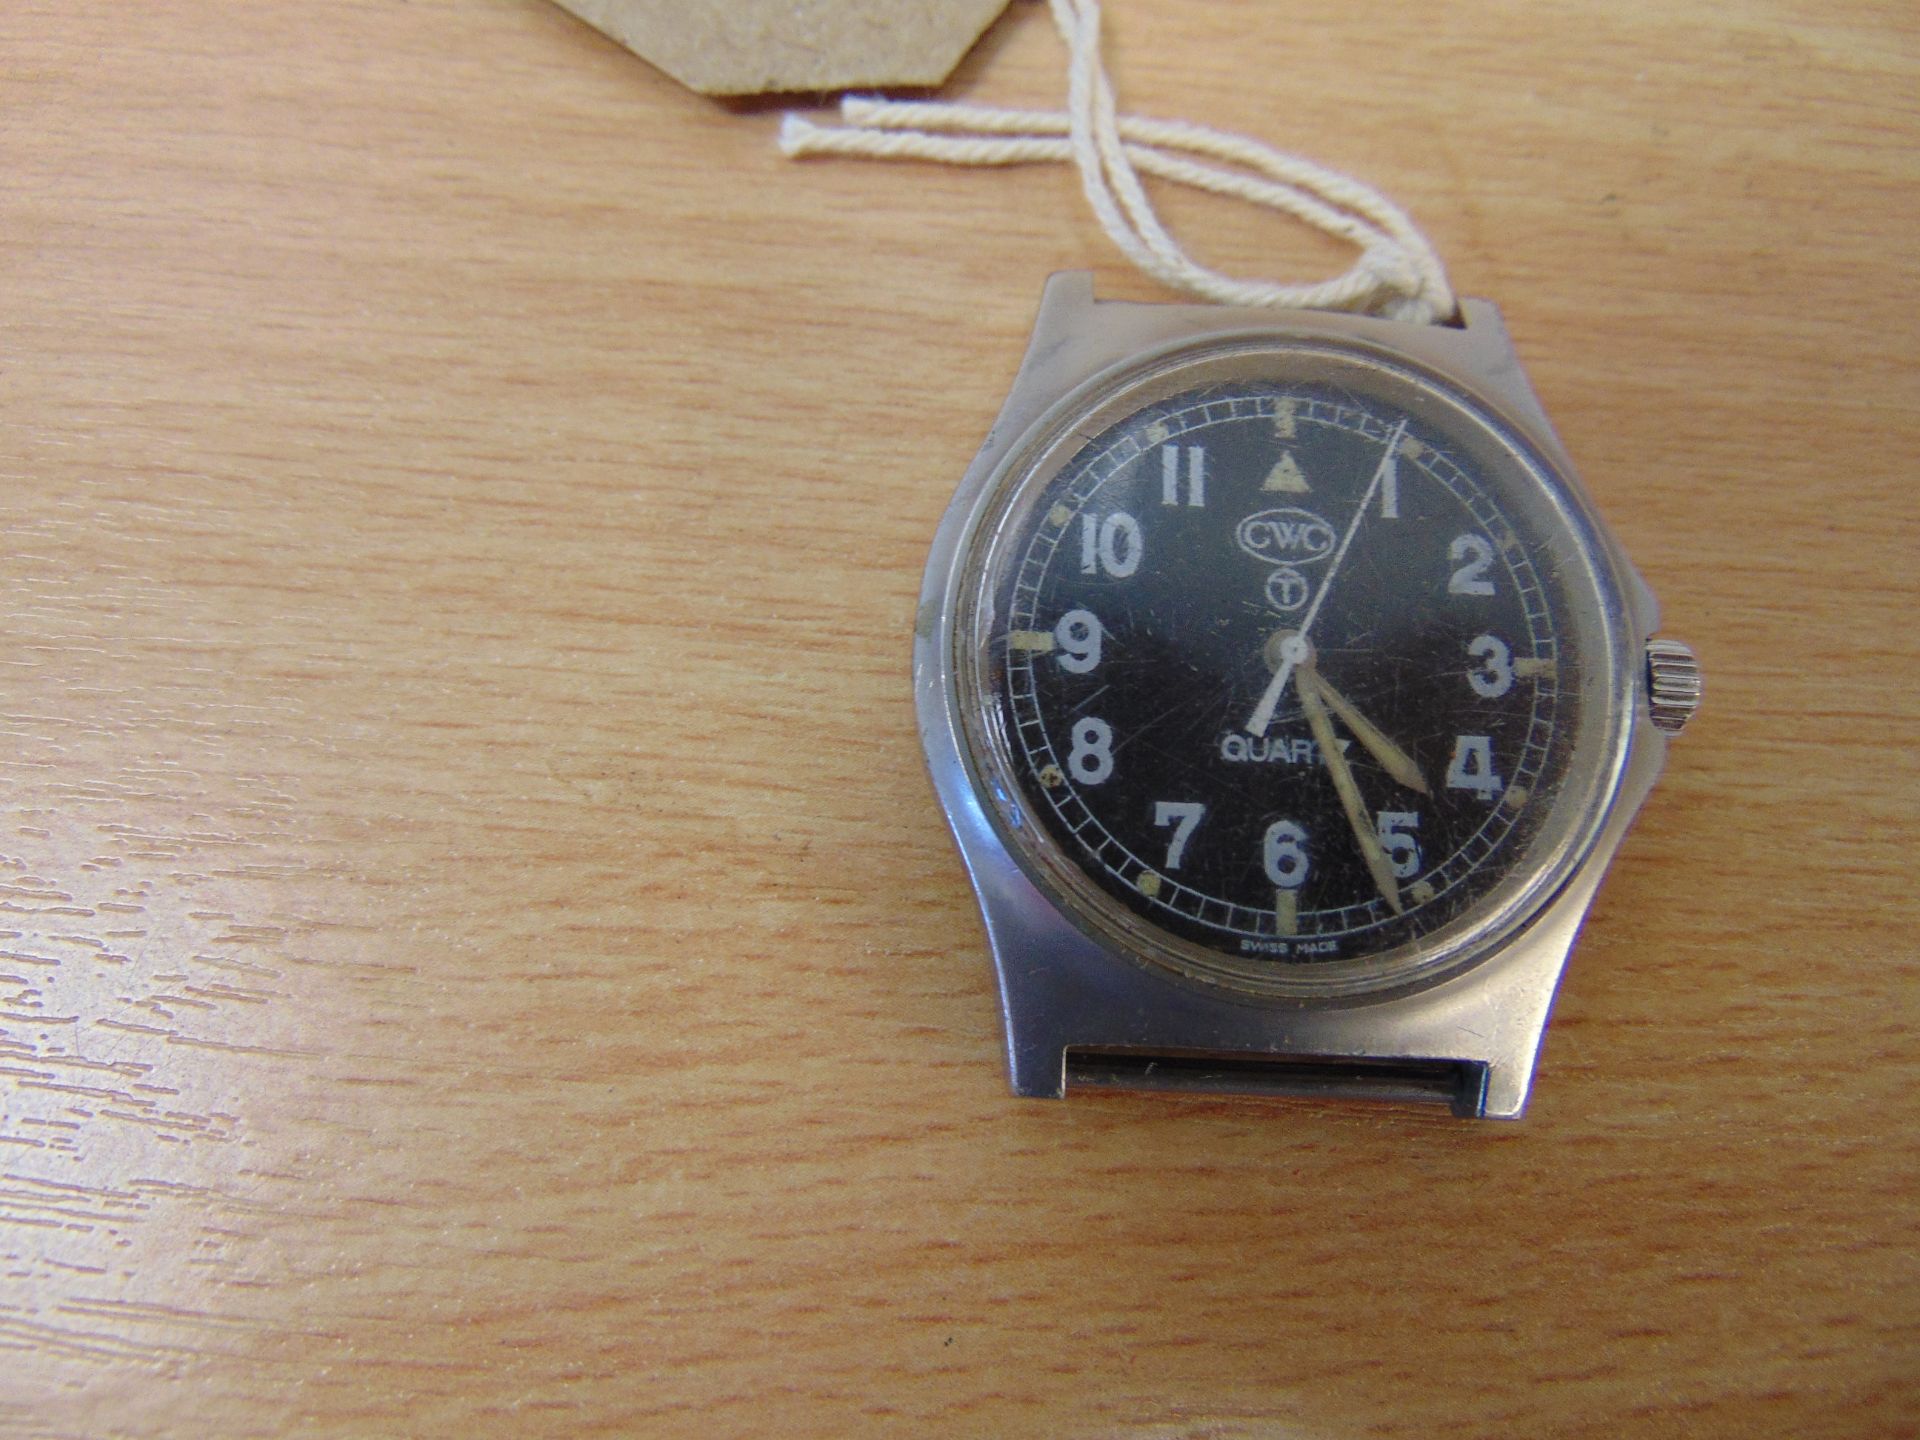 CWC W10 British Army Service Watch Nato Marks, Date 1998 - Image 2 of 4